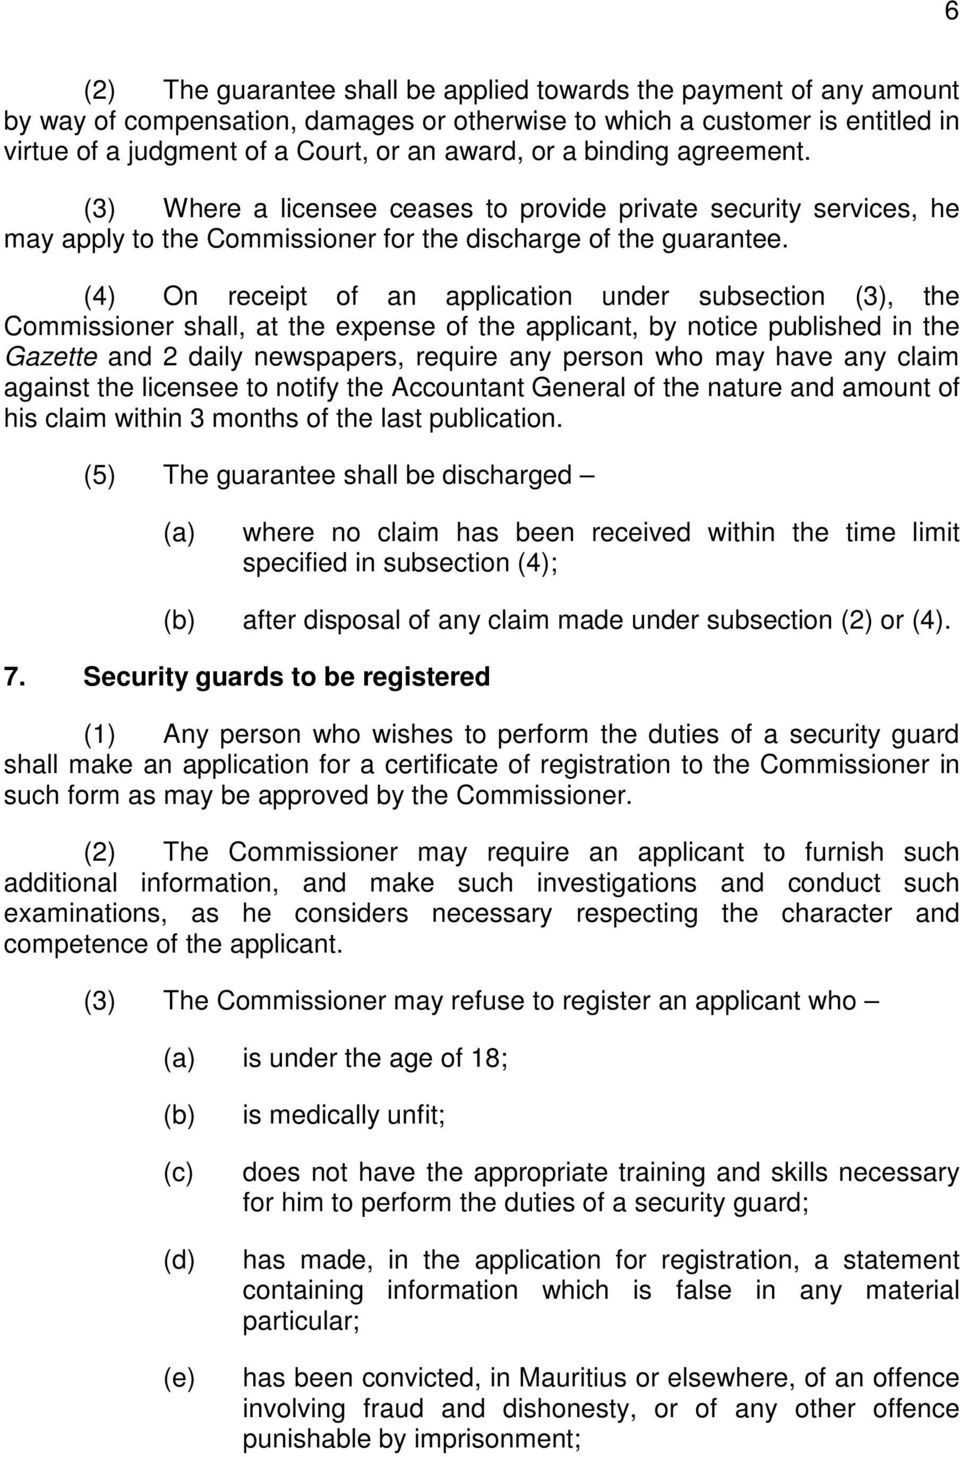 (4) On receipt of an application under subsection (3), the Commissioner shall, at the expense of the applicant, by notice published in the Gazette and 2 daily newspapers, require any person who may